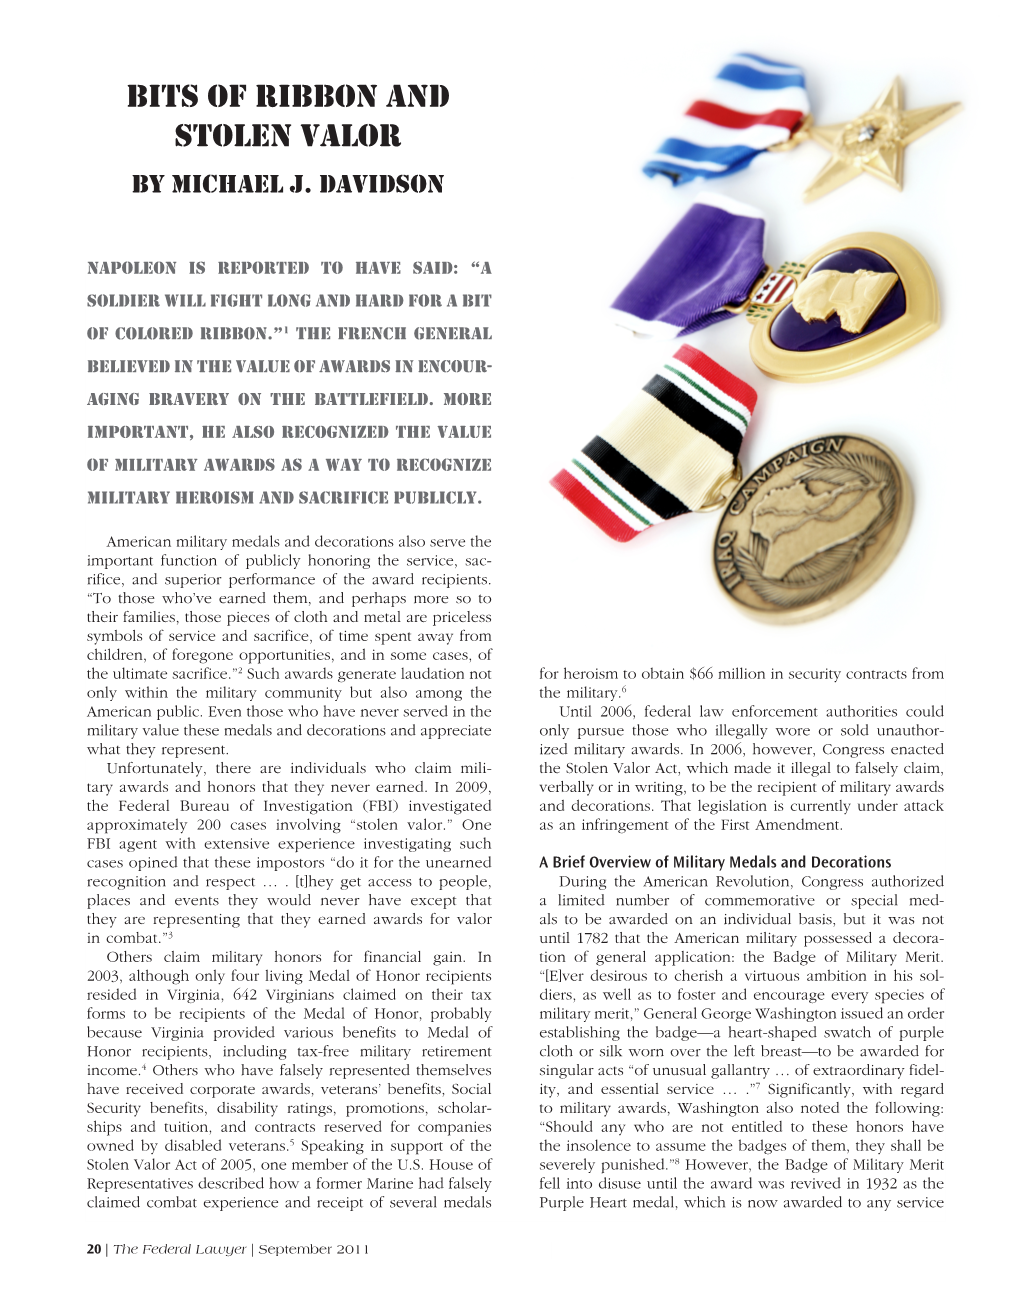 Bits of Ribbon and Stolen Valor by Michael J